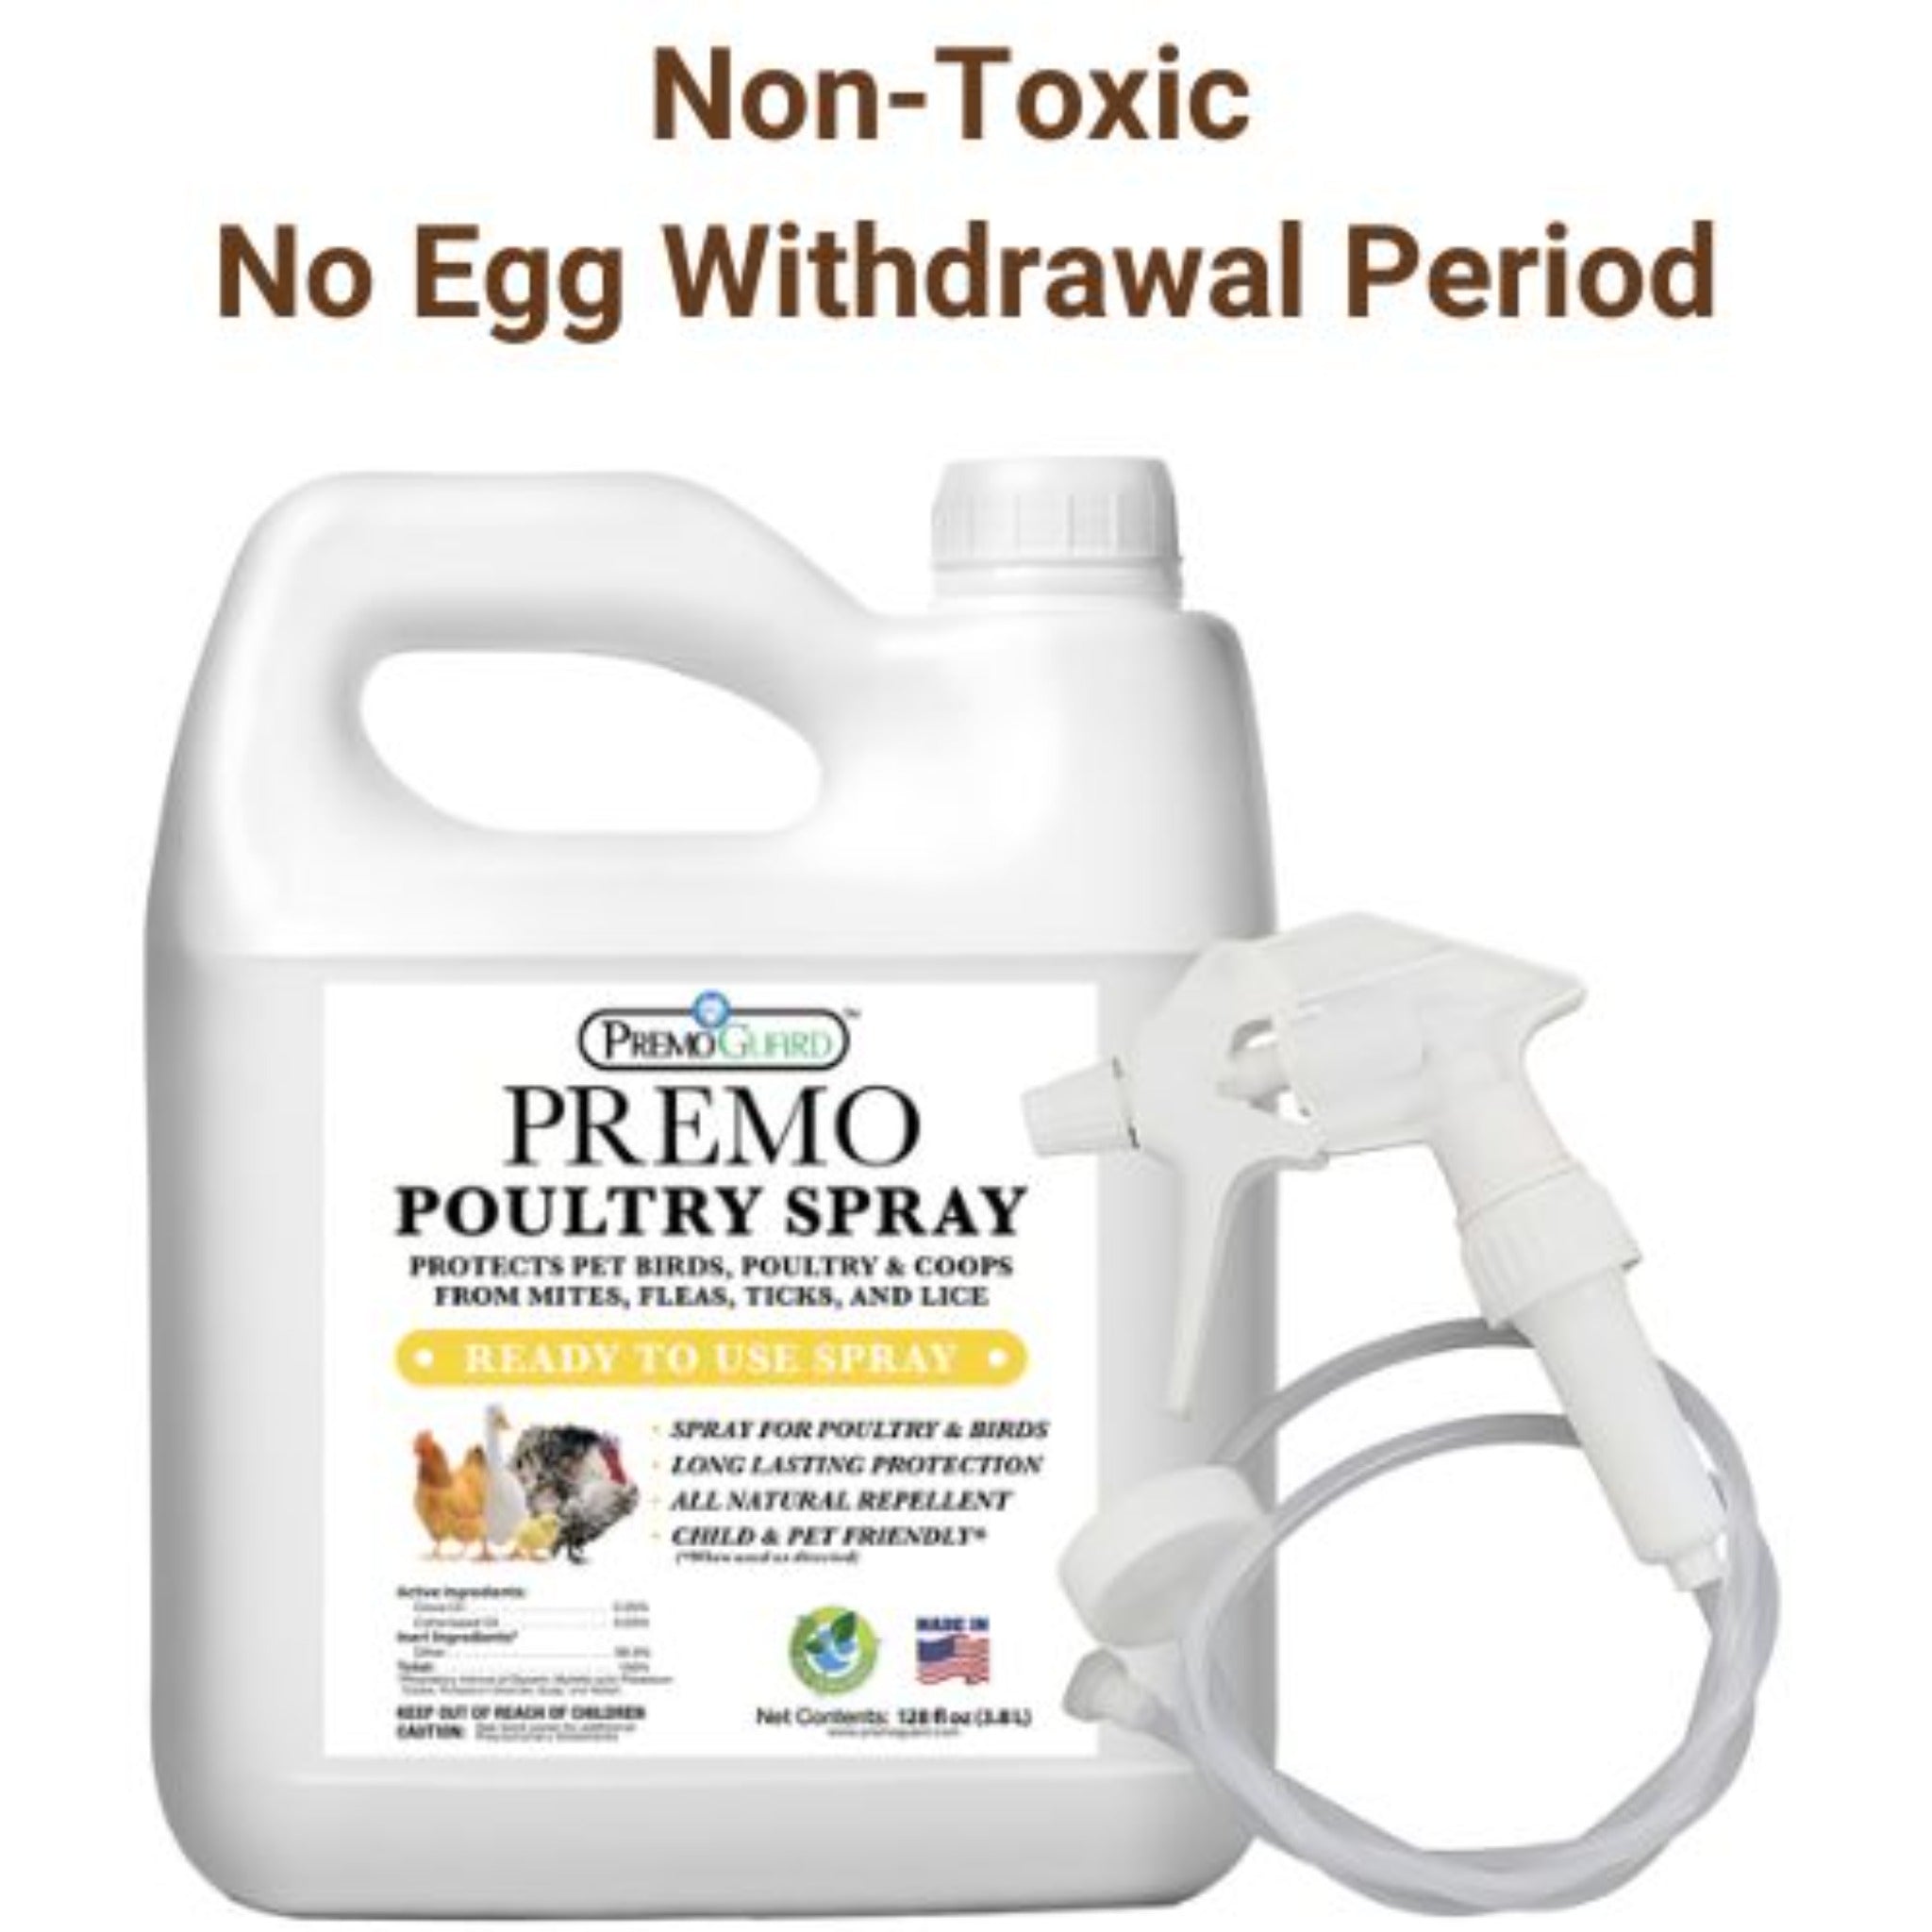 Hatching Time Premo Guard. Poultry spray gallon can be seen in image with spray handle. Text reads, Non-toxic. No Egg withdrawal period.